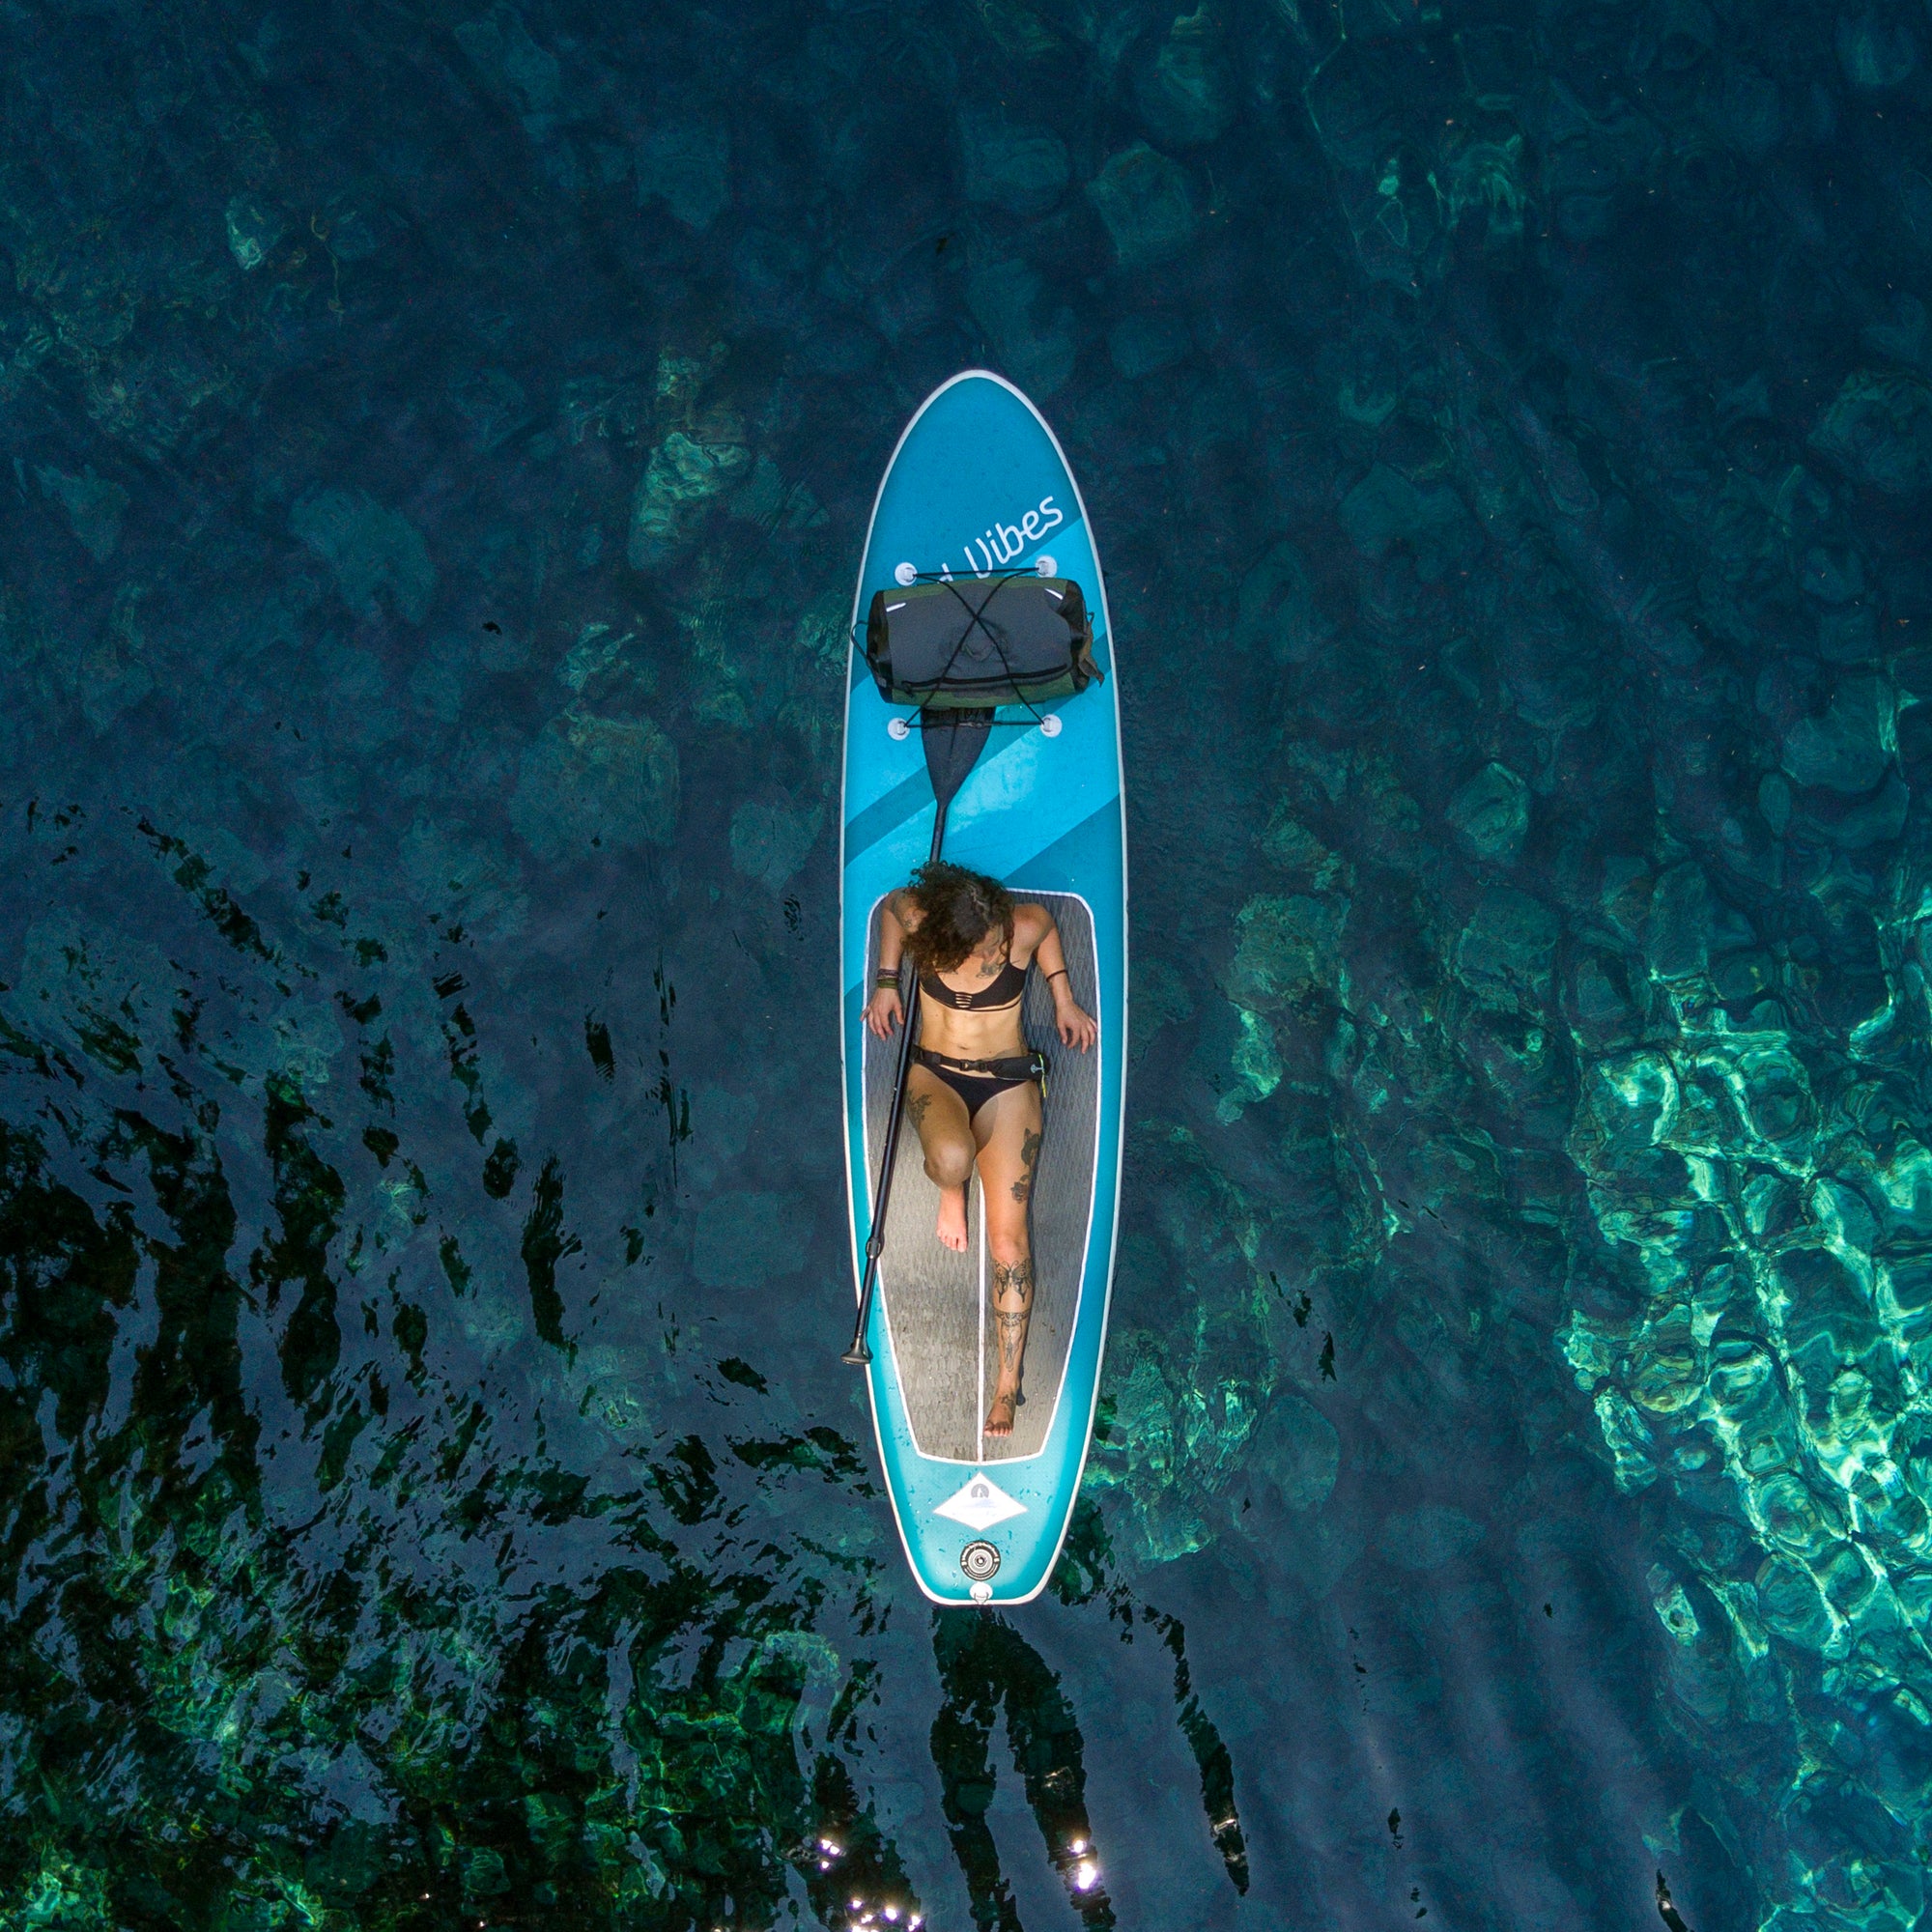 Floating on Good Vibes Superlite inflatable paddleboard by Stand on Liquid at Blue Pool Oregon